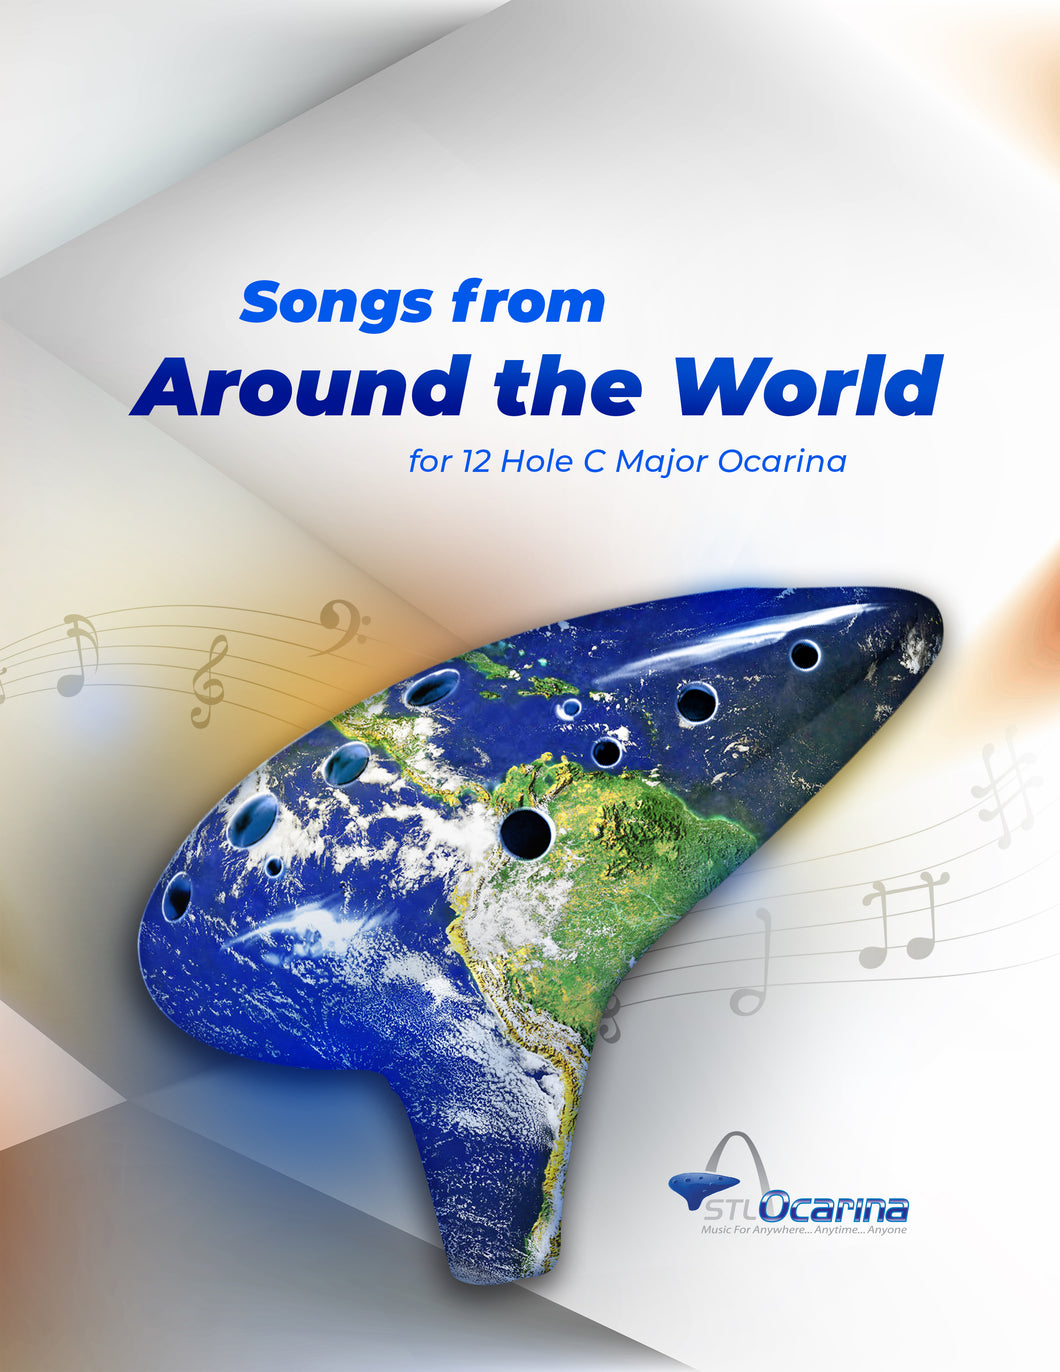 Songs from Around the World on Ocarina